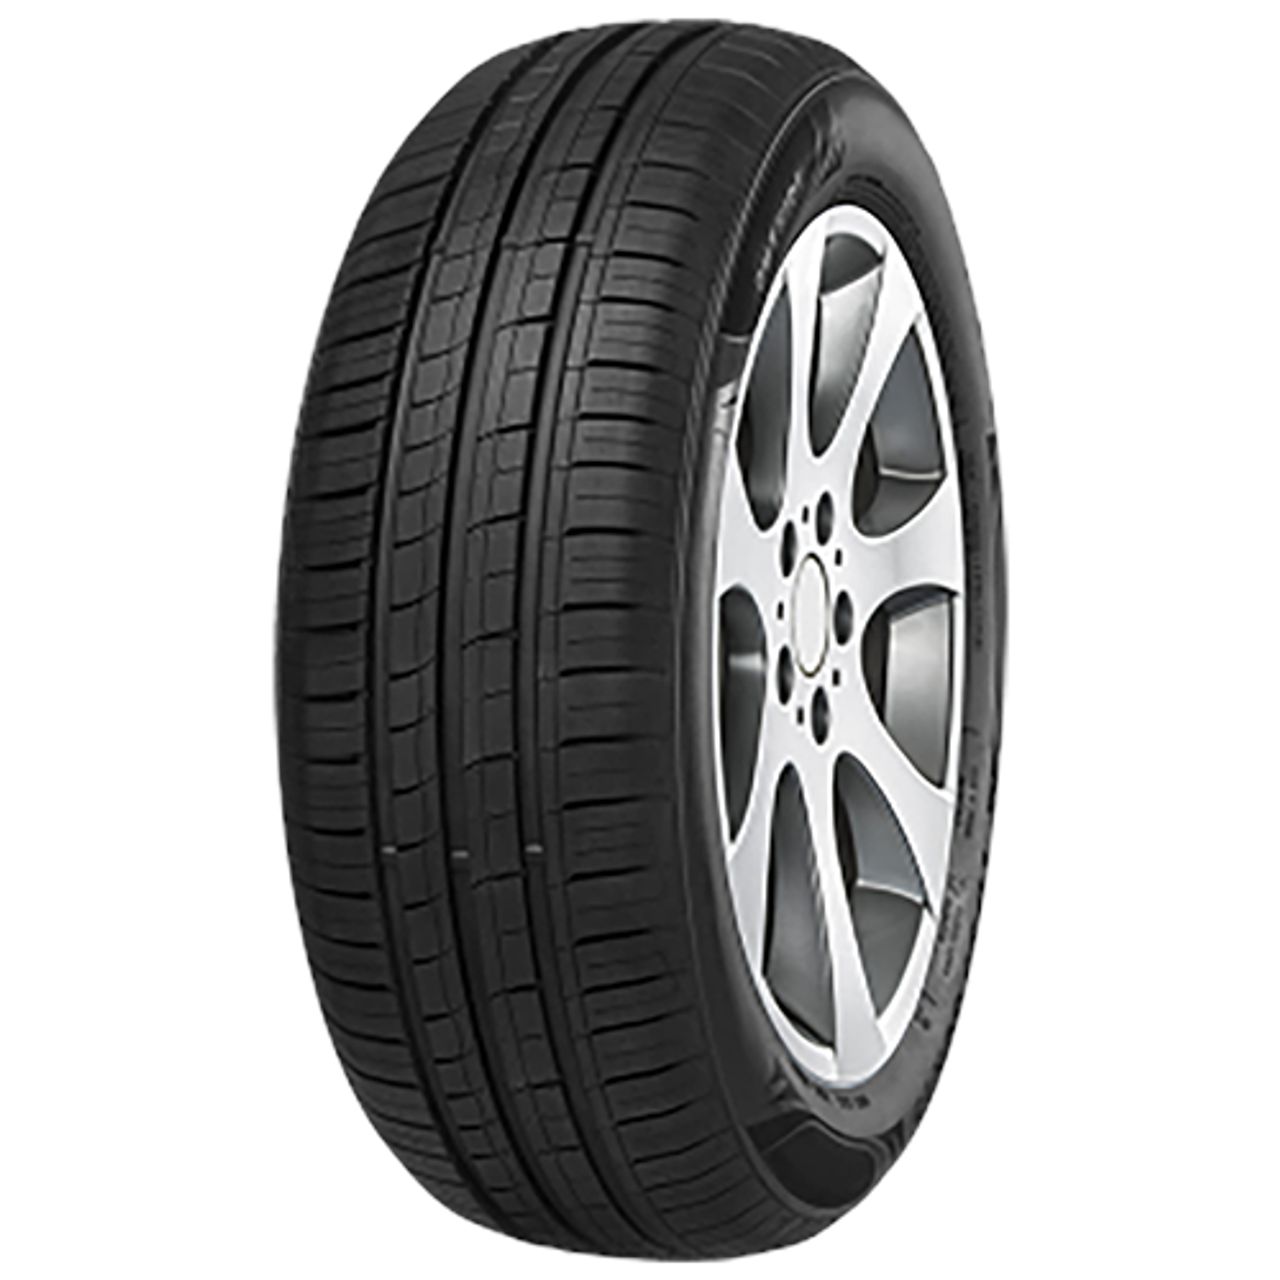 IMPERIAL ECODRIVER 4 165/80R13 83T BSW